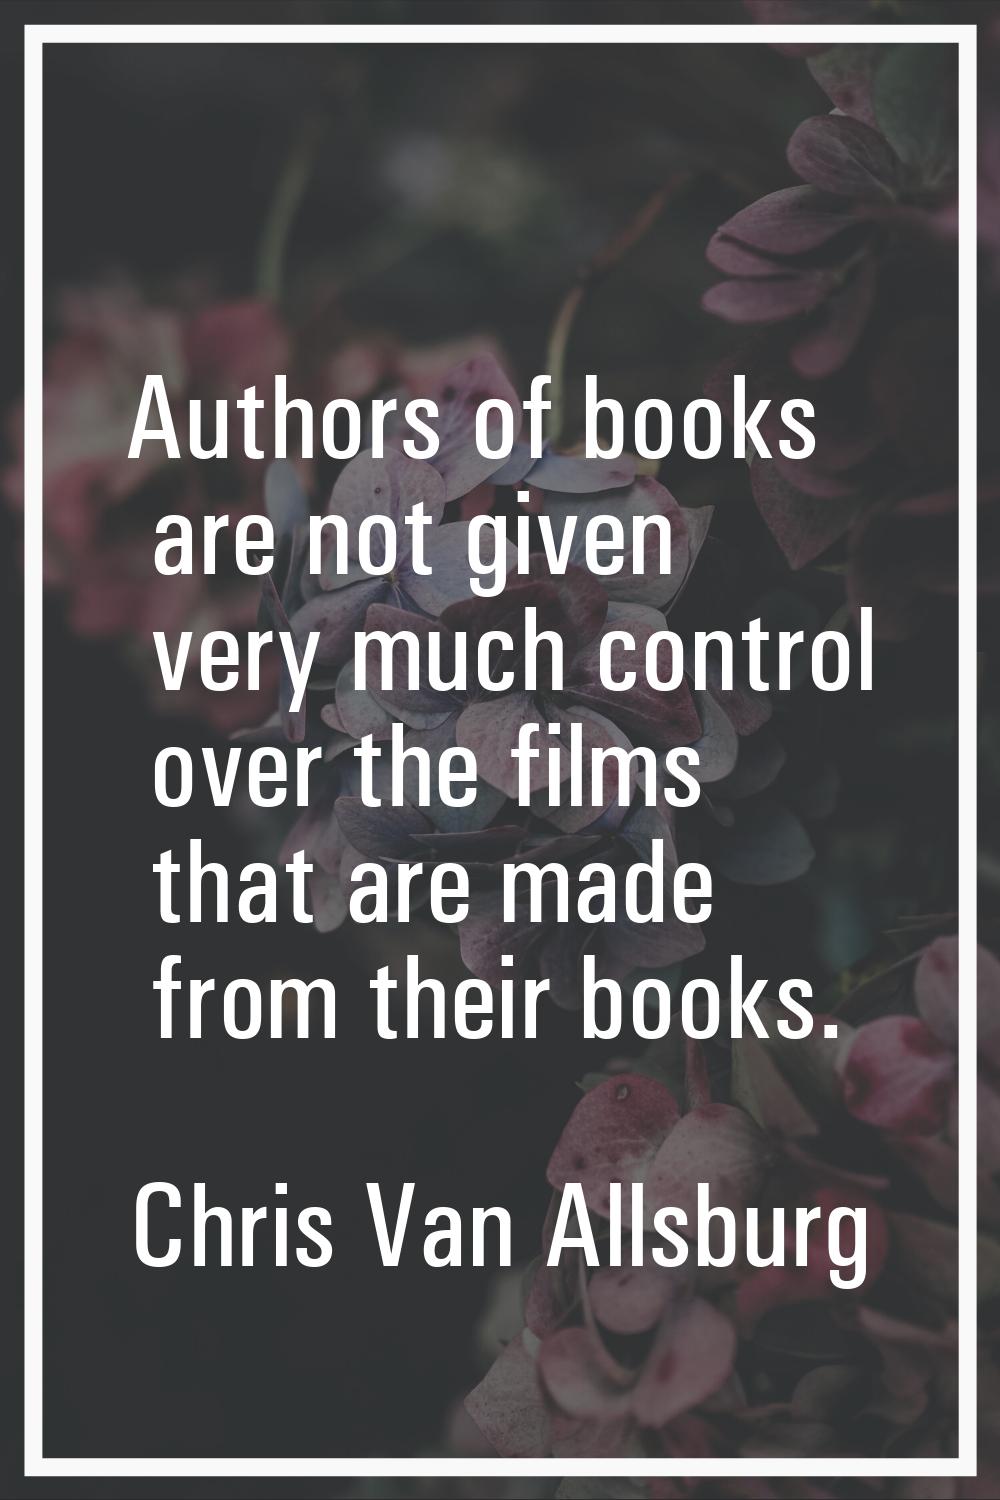 Authors of books are not given very much control over the films that are made from their books.